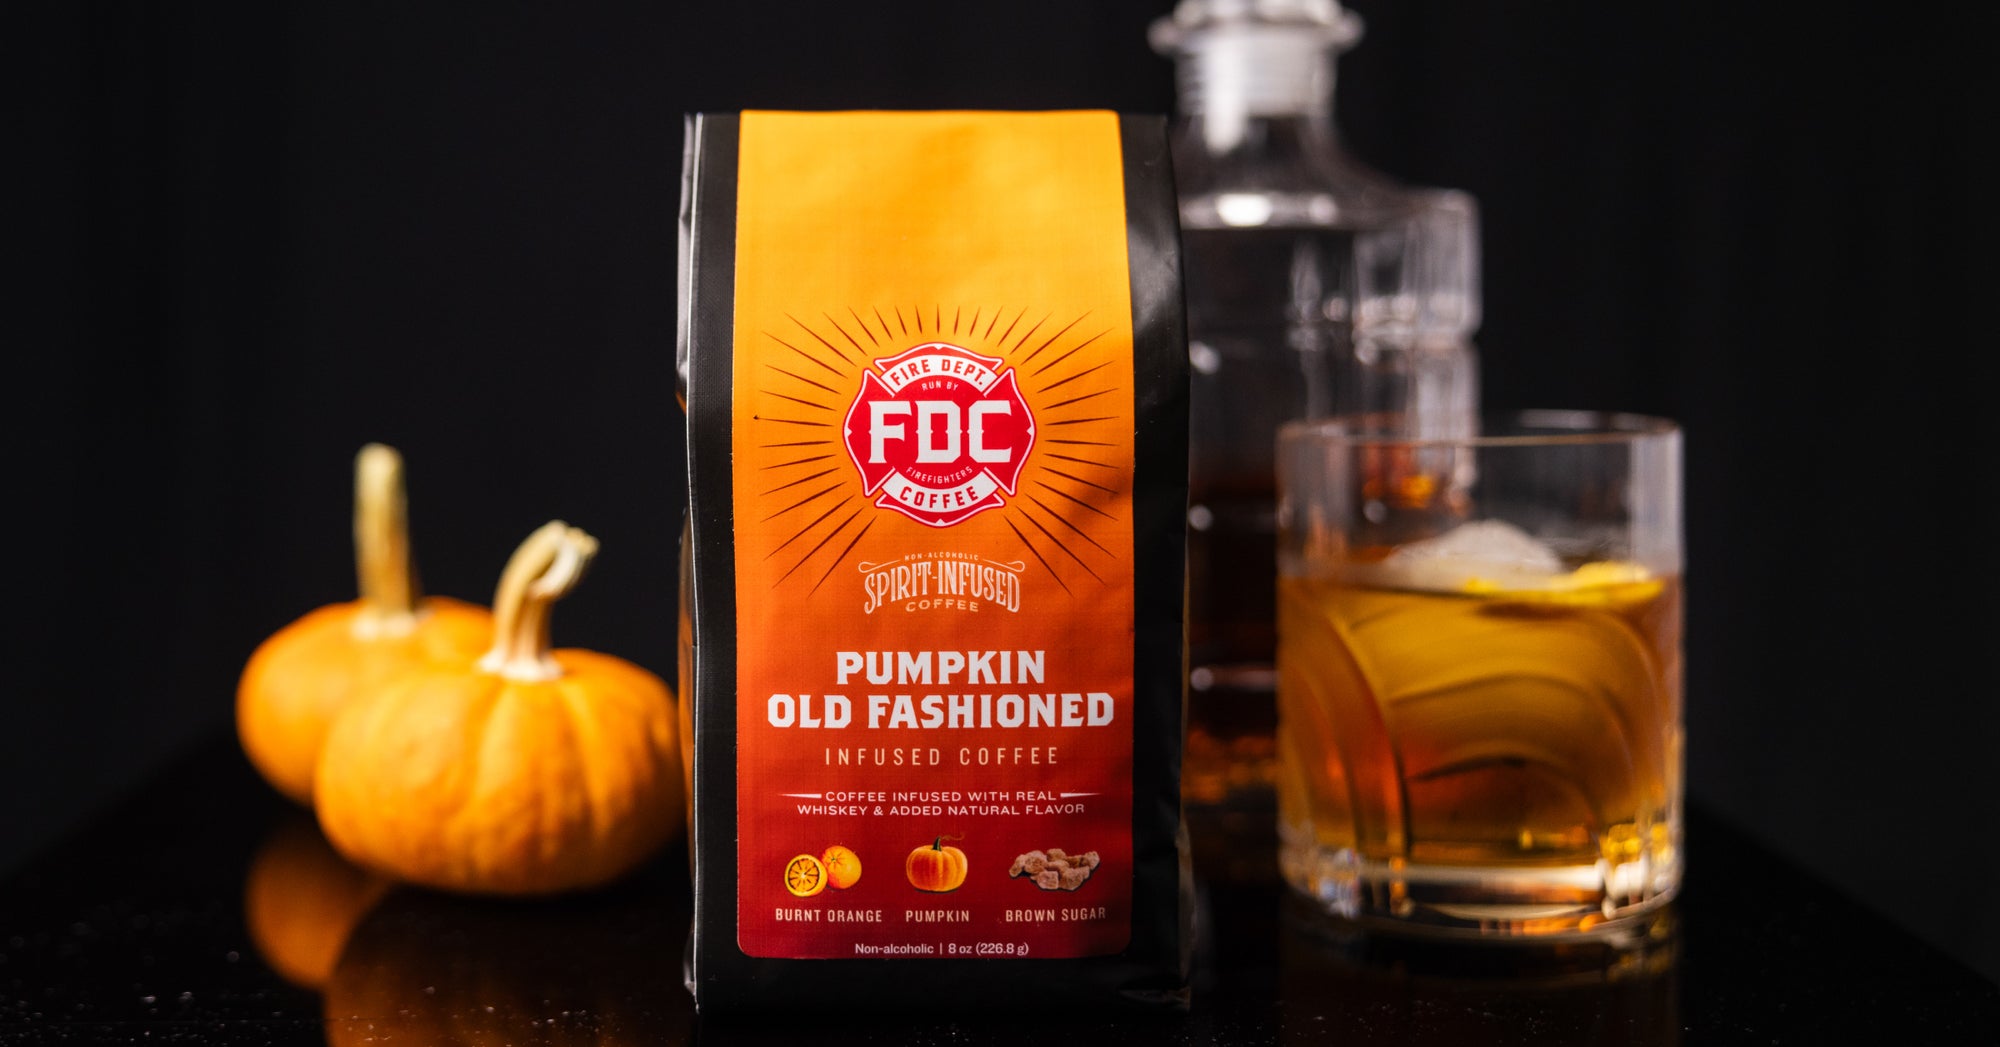 Featuring October's Spirit Infused Coffee - Pumpkin Old Fashioned Coffee.